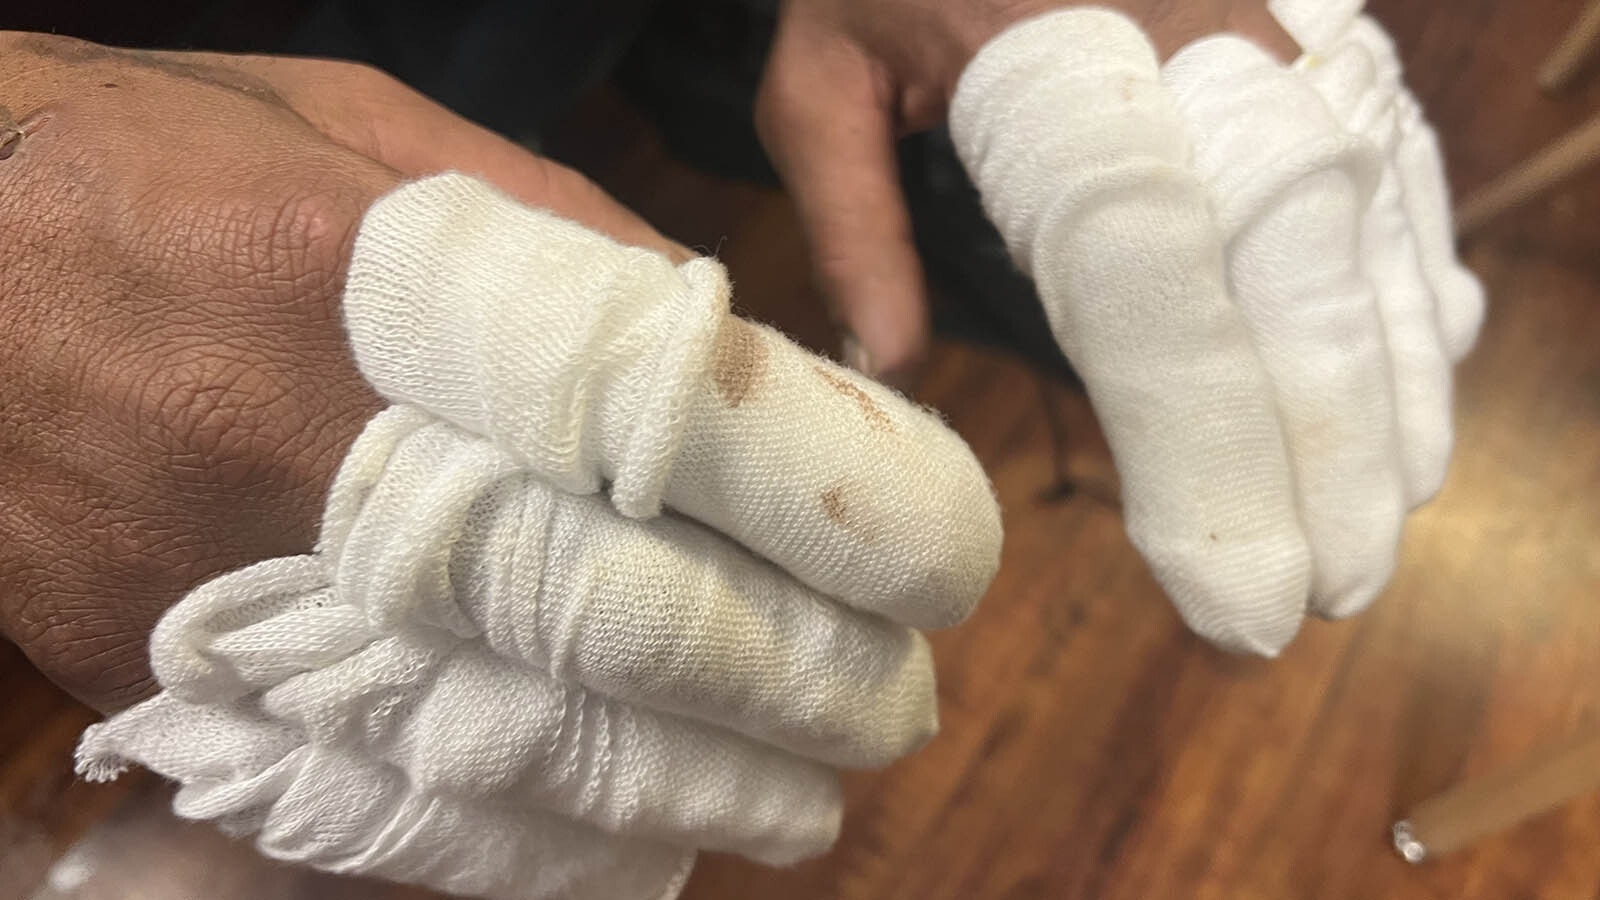 Some of the homeless who sought shelter at True Vine Community Church this past weekend showed up with various levels of frostbite. The severe cases were taken for medical attention.